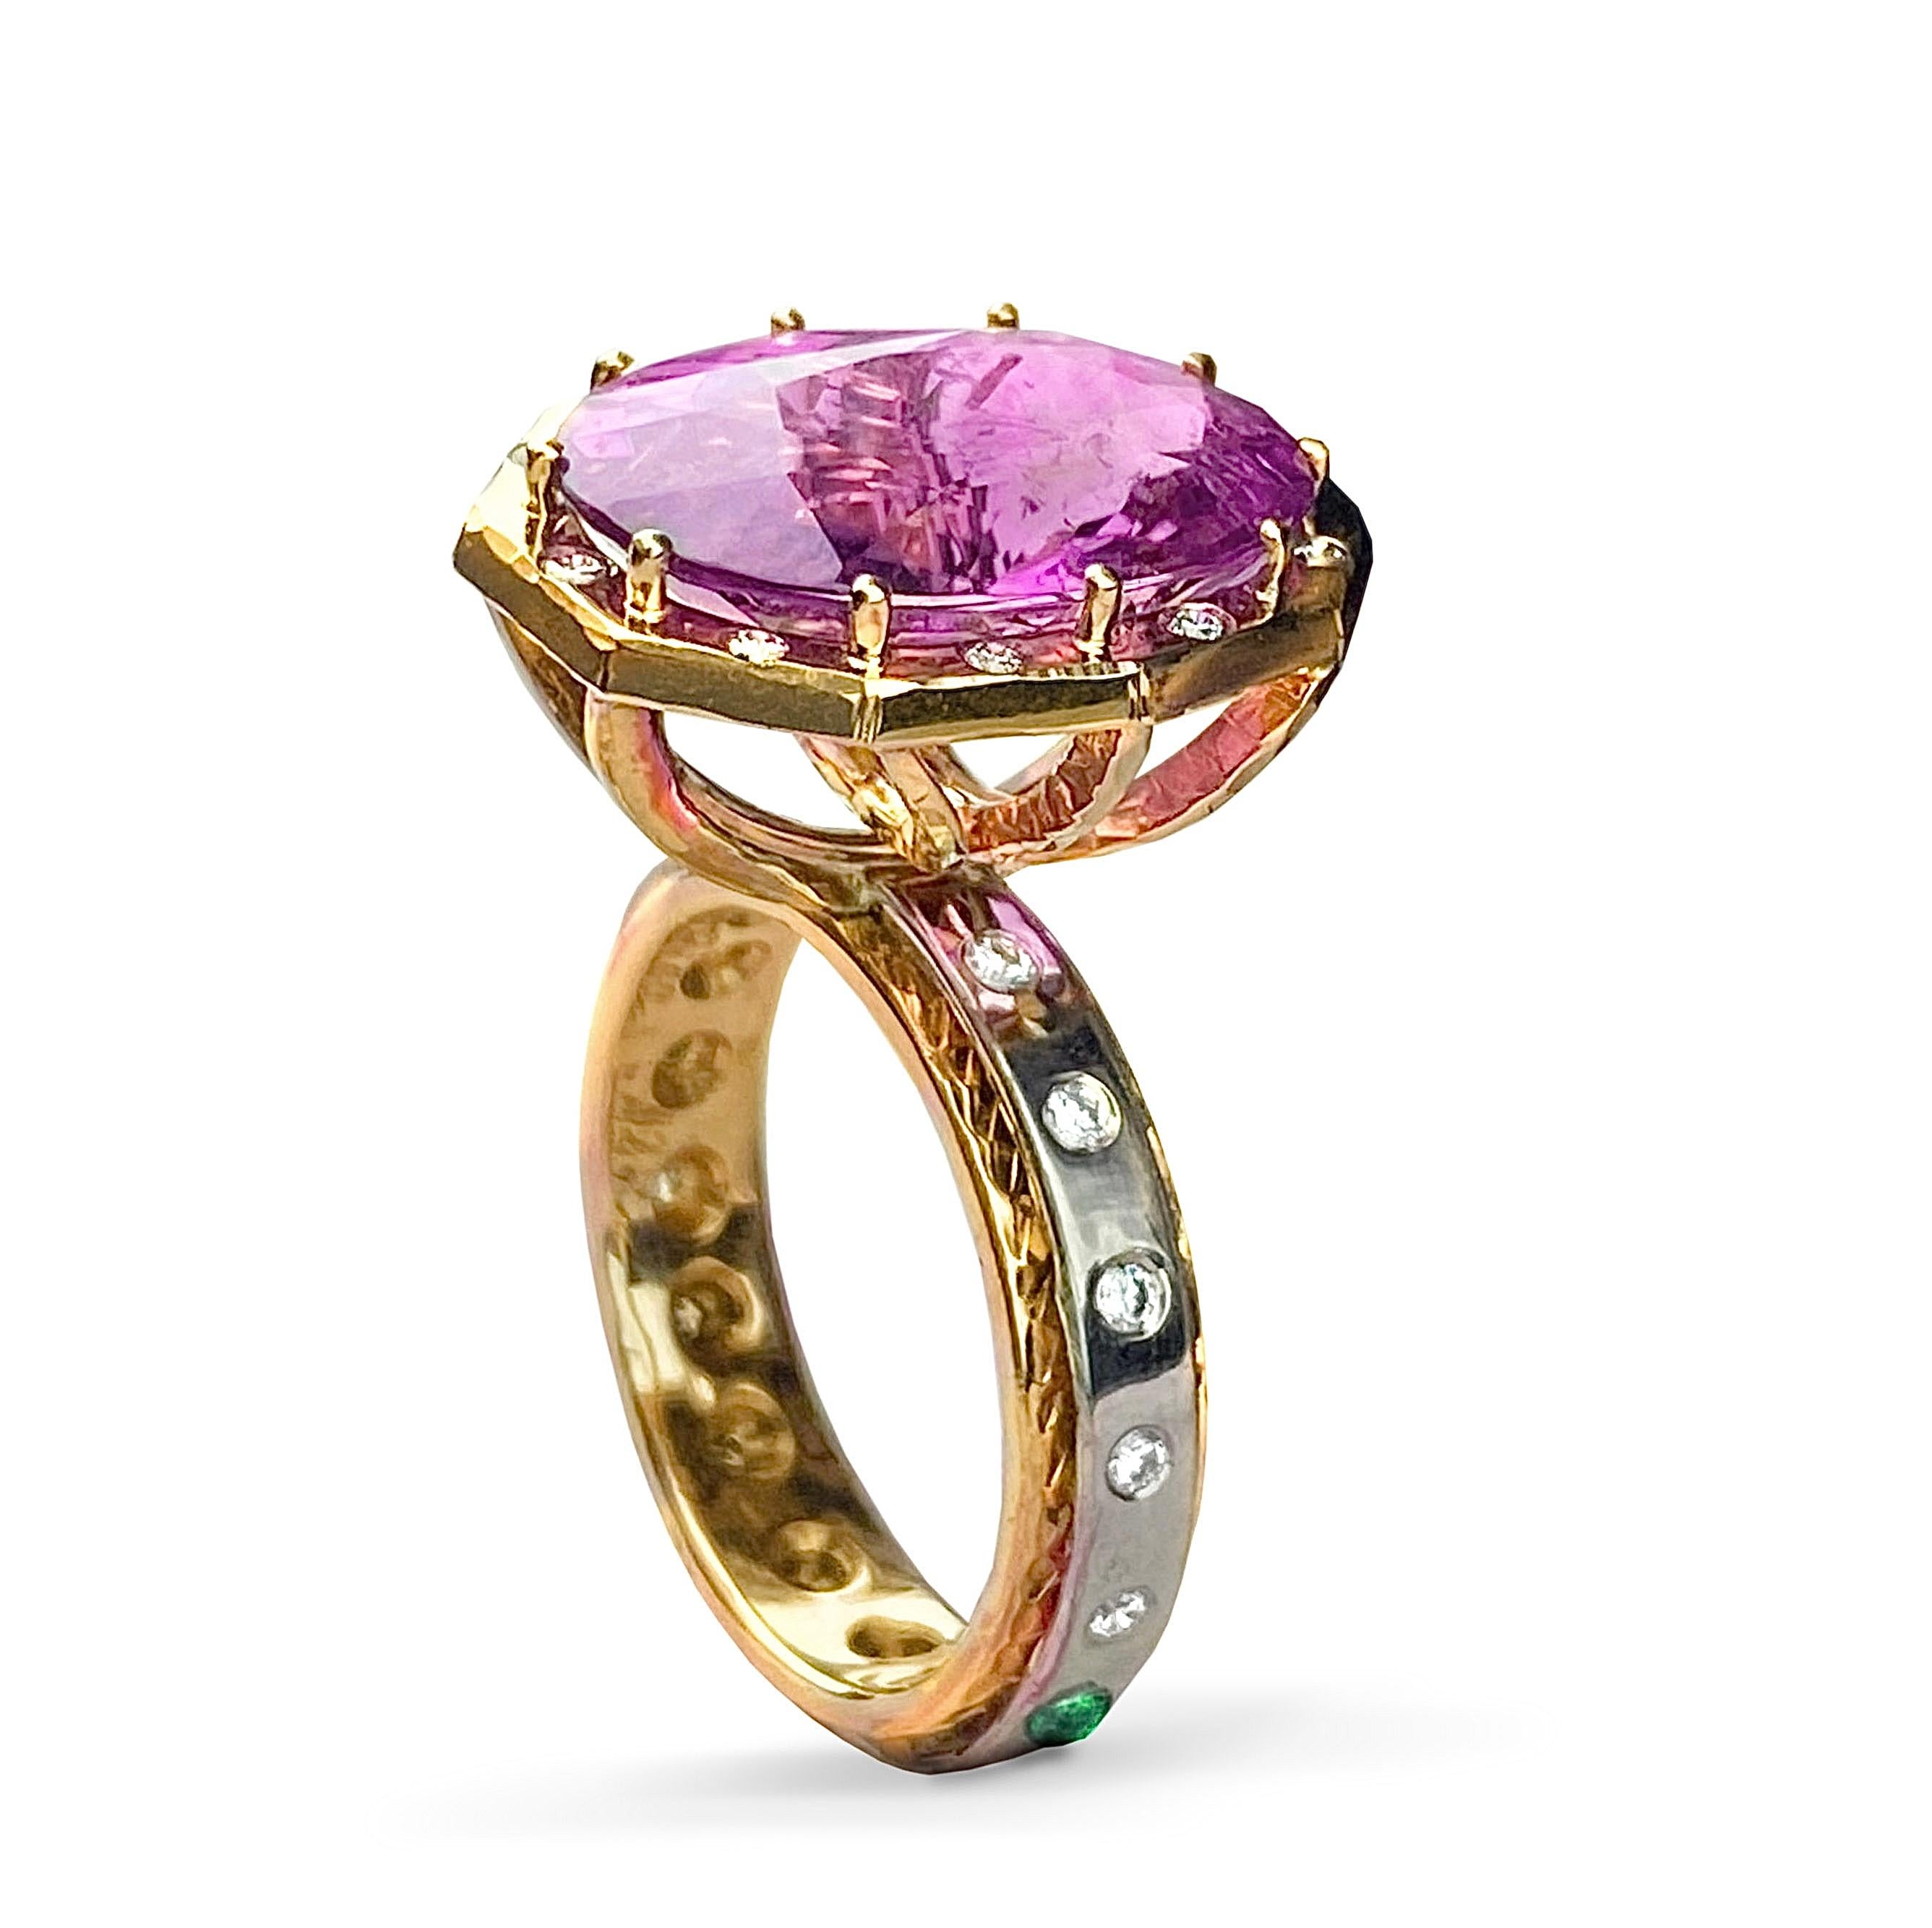 This 8,32ct tourmaline (Rubellite) has been catch on the band made of white and rose 18kt gold. It's been decorated with 15 white diamonds VVS/G. Total diamonds 0,21ct.